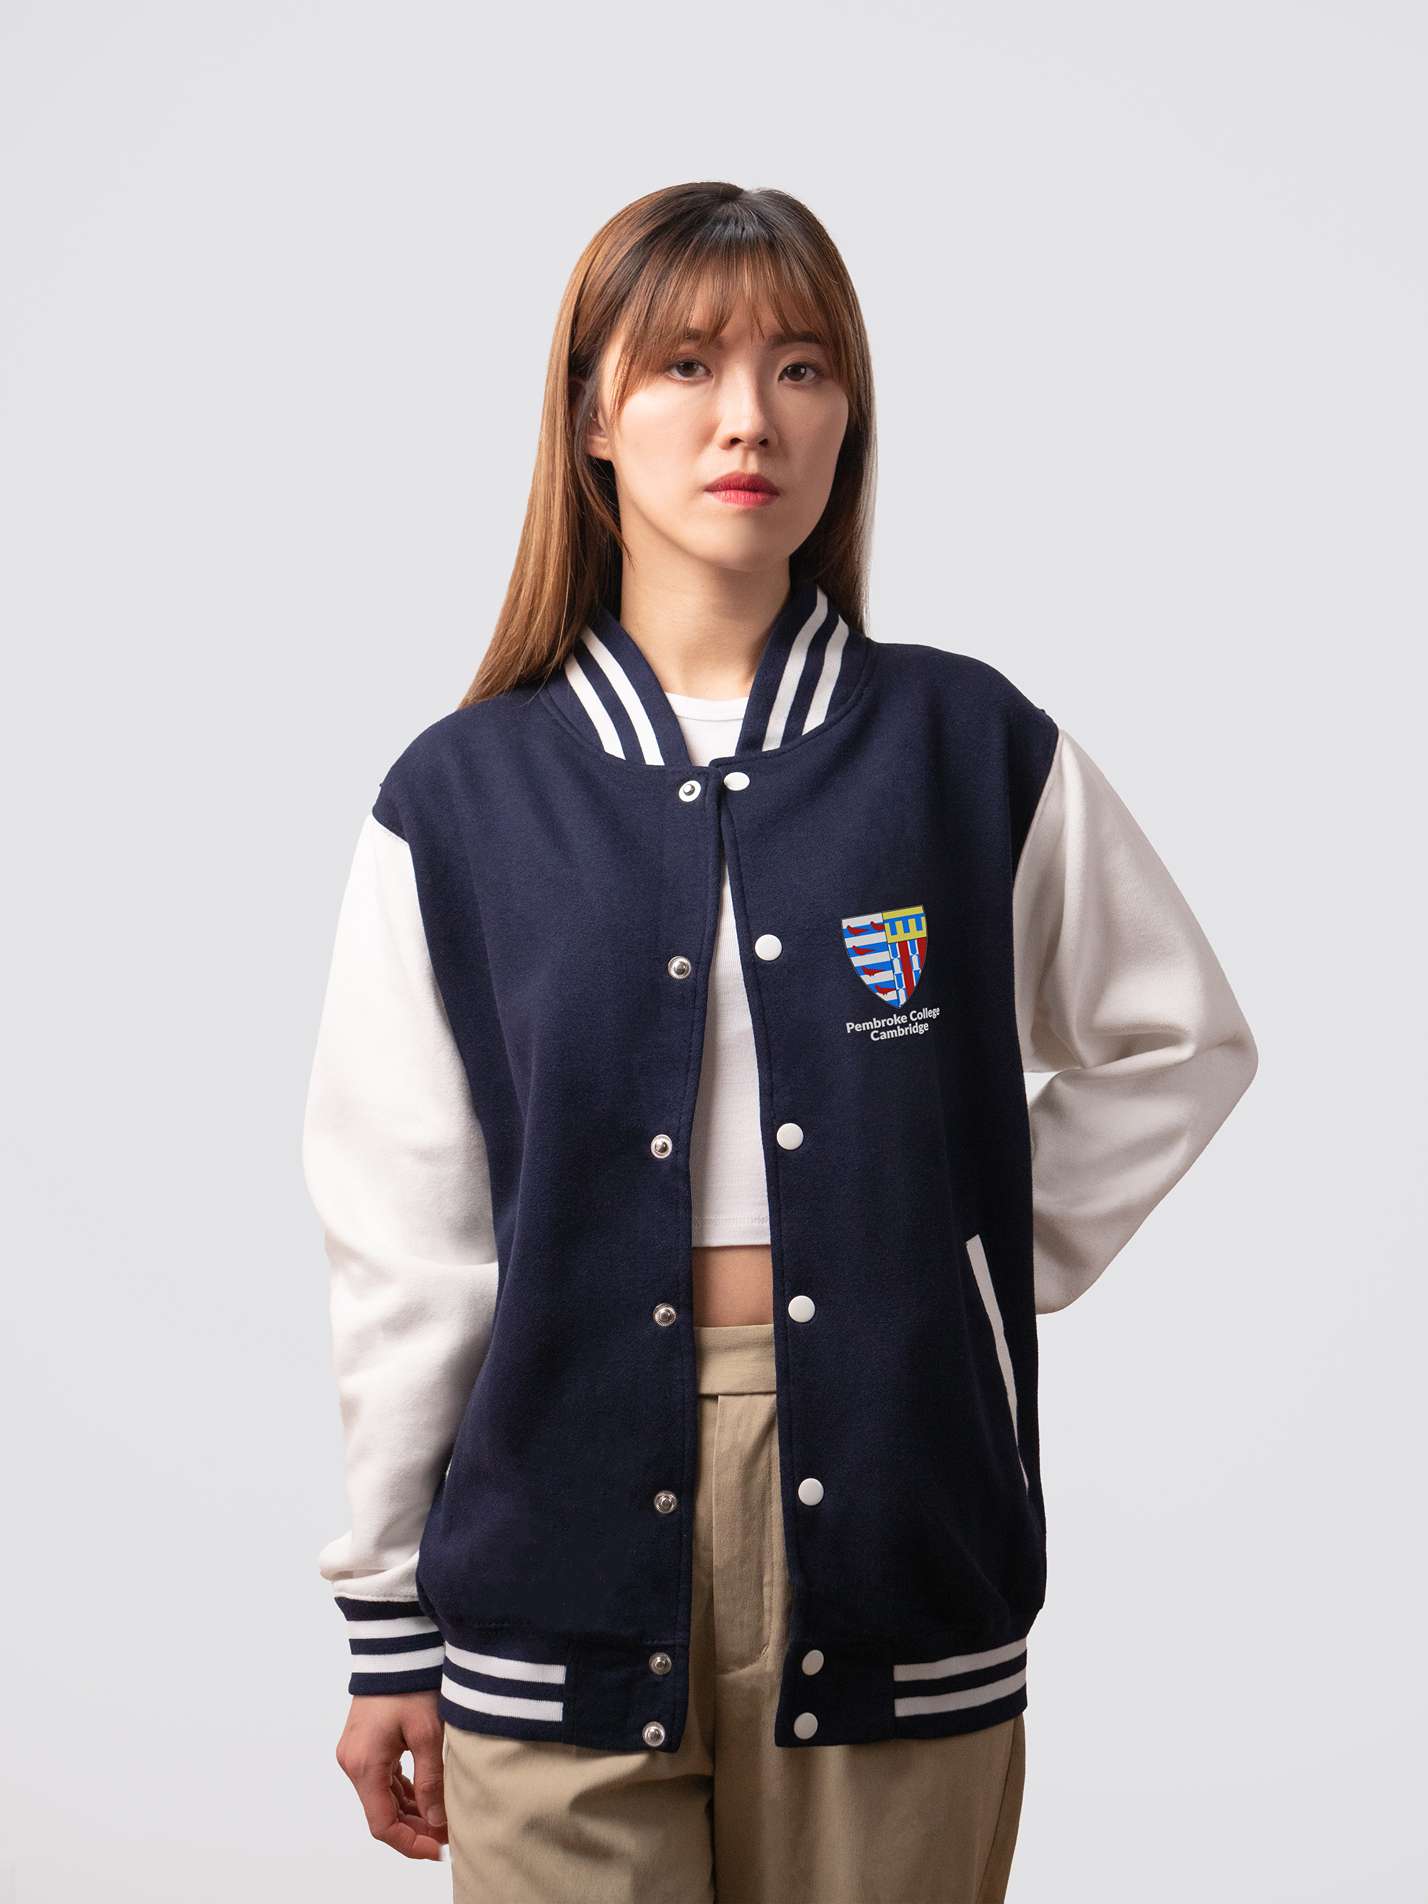 Retro style varsity jacket, with embroidered Pembroke crest